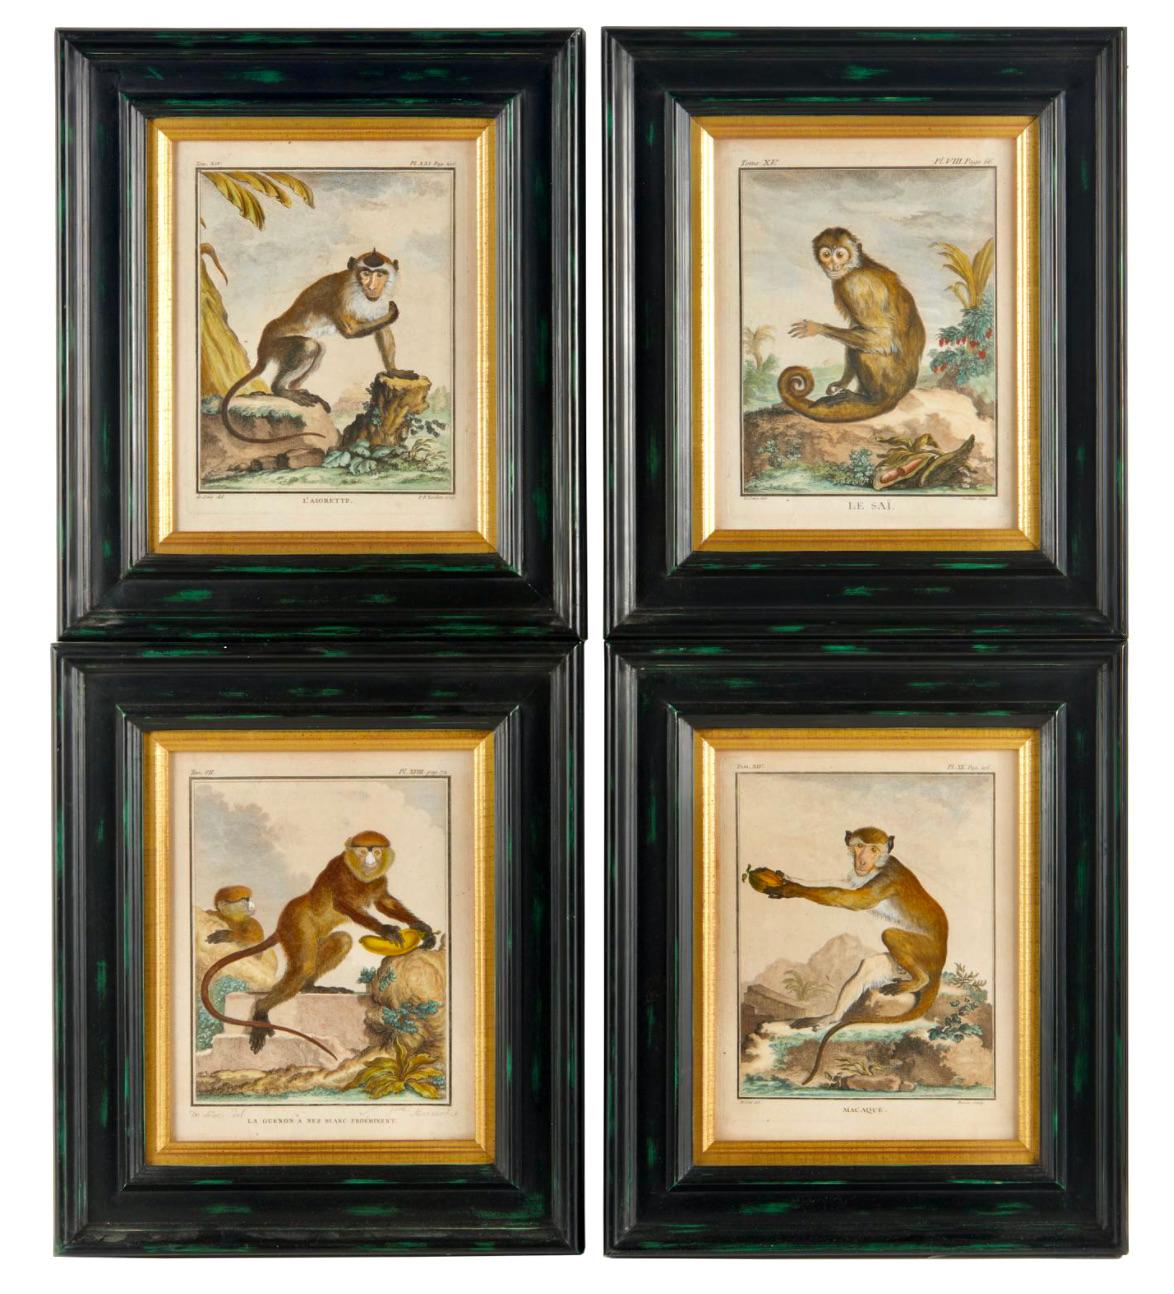 Framed 18th Century Comte de Buffon Old World Monkey French Engraving, Macaque For Sale 3